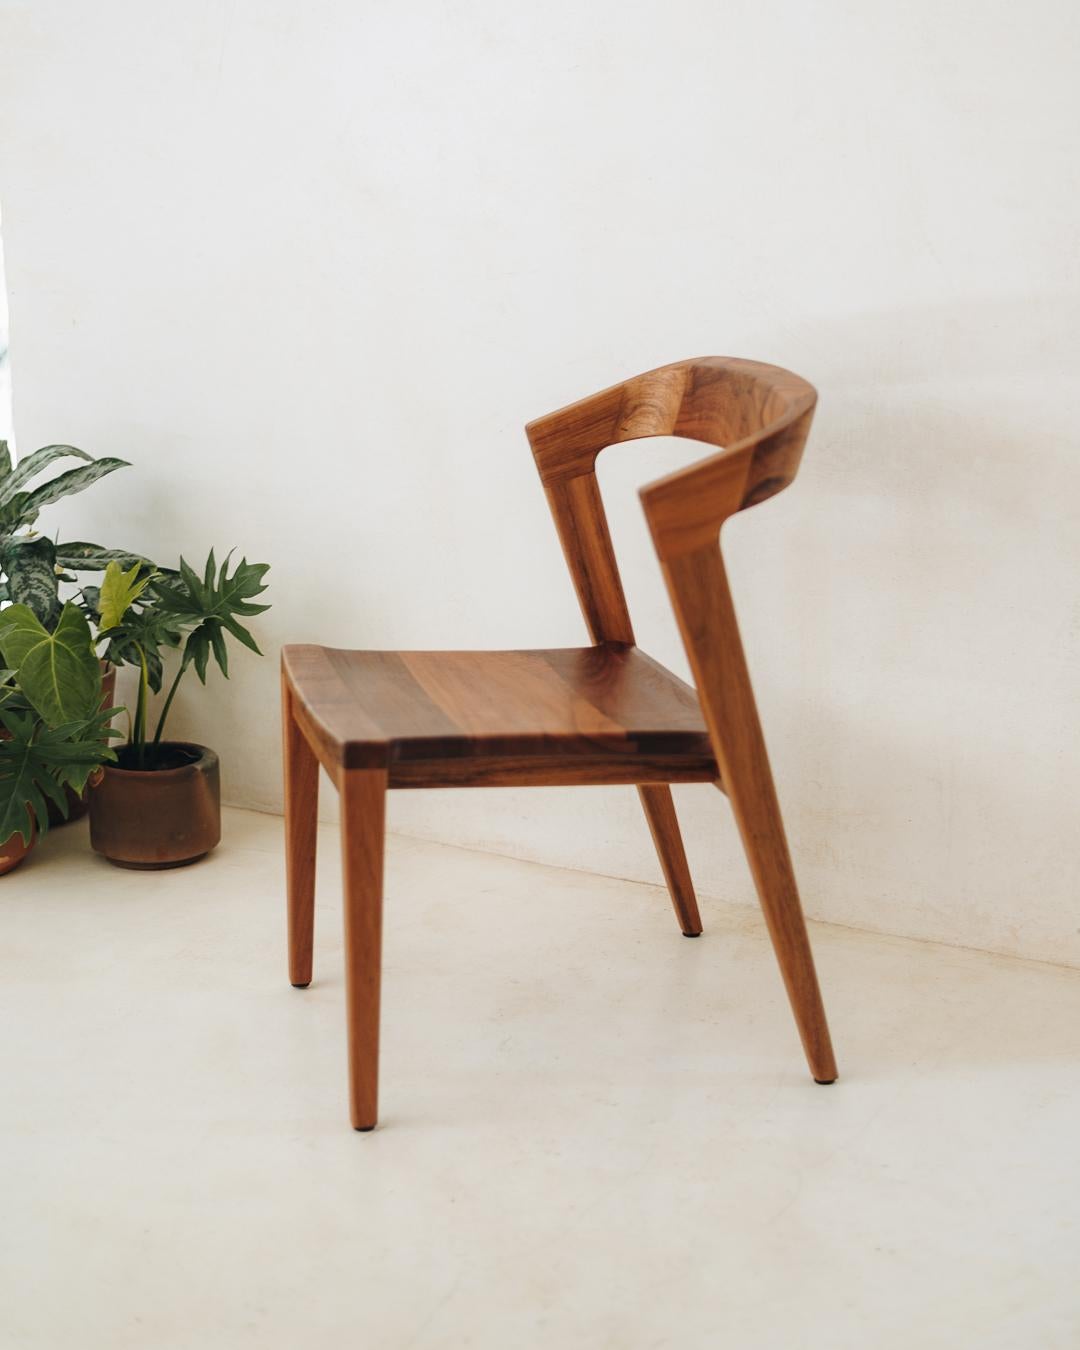 The Tamay Chair brings together personality and subtlety, based on simple lines and harmonious proportions, which underscore the natural beauty of the solid tropical wood native to southeast Mexico. Produced with an accent on the joints, details and